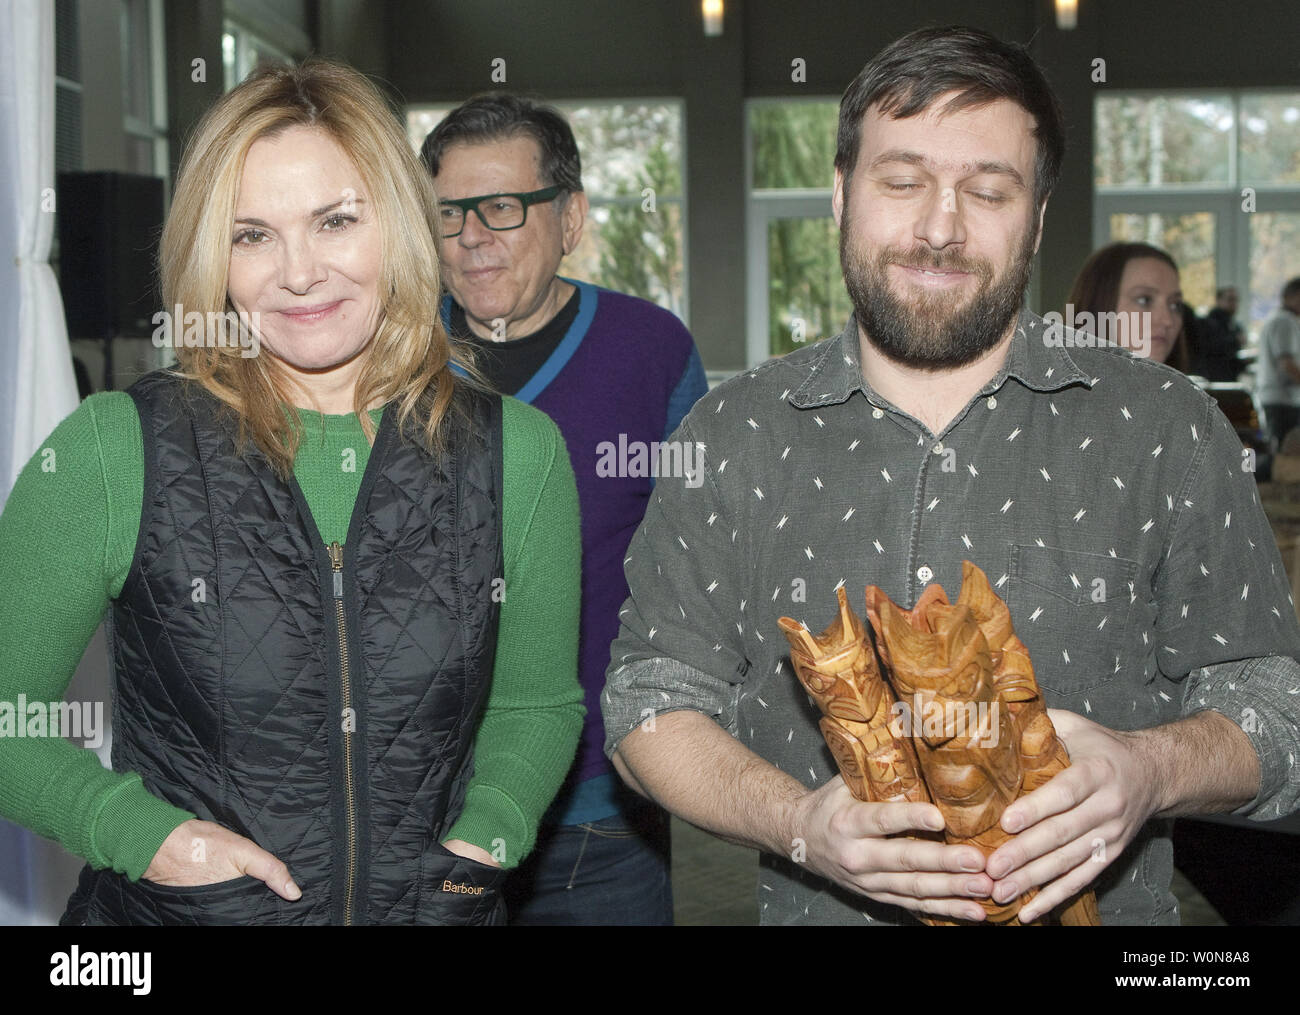 Actress Kim Cattrall and Quebec director Maxime Giroux holding his film's four awards leave the white carpet at the Awards Brunch during the 2014 Whistler Film Festival in Whistler, British Columbia, December 7, 2014. Giroux's film 'Felix and Meira' won the Borsos Award for Best Canadian Feature, Best Screenplay and Best Borsos Director Awards, while the film's lead Hadas Yaron won the Best Performance Award.   UPI/Heinz Ruckemann Stock Photo